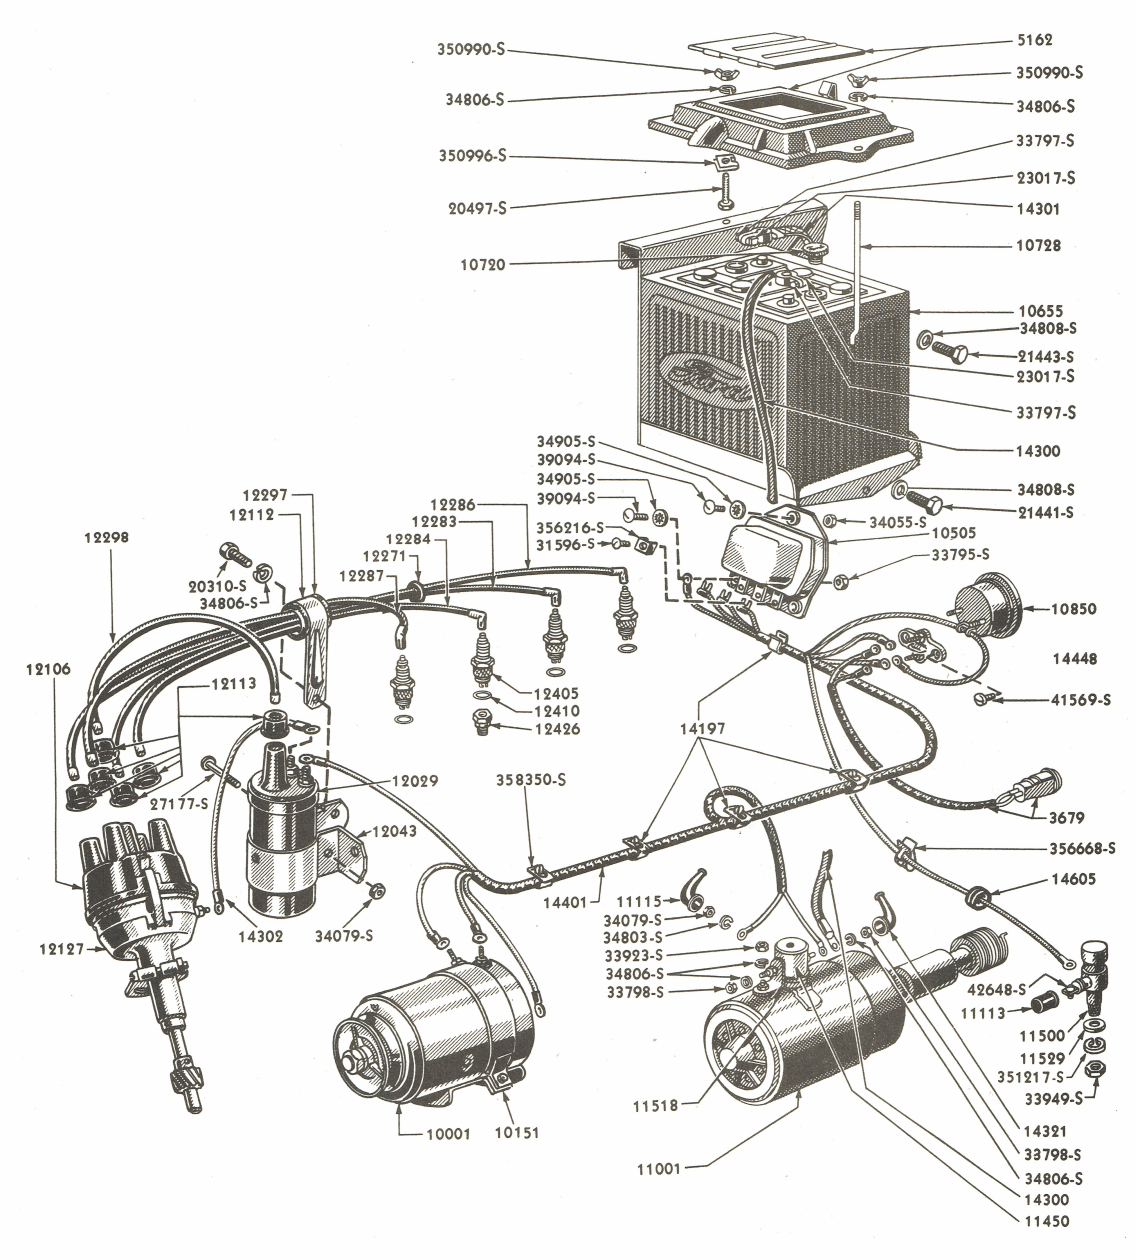 Fa_3386] Diagram For 1952 Ford 8N Tractor Get Free Image